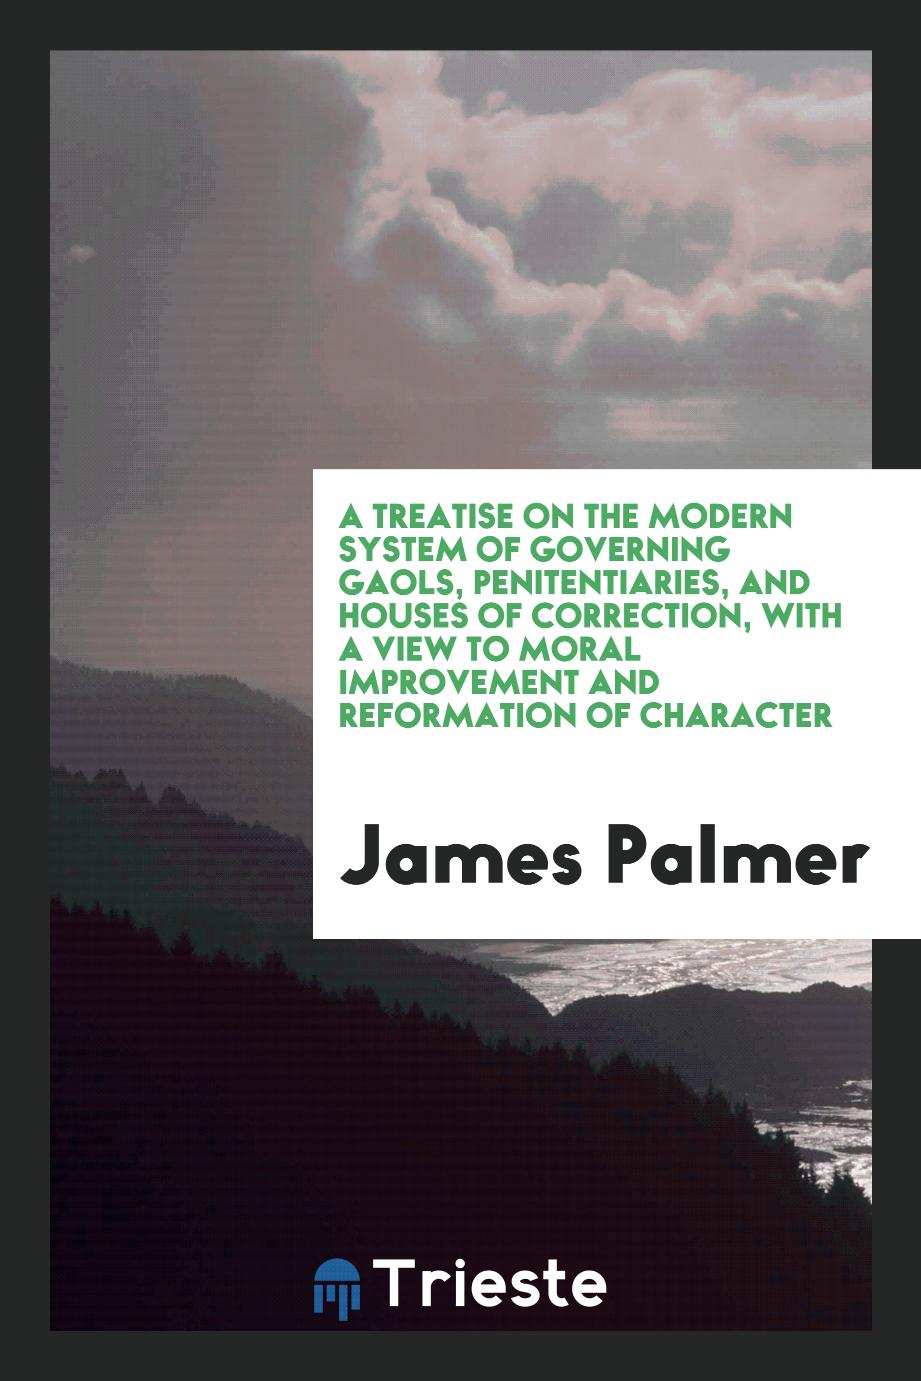 A Treatise on the Modern System of Governing Gaols, Penitentiaries, and Houses of Correction, with a View to Moral Improvement and Reformation of Character